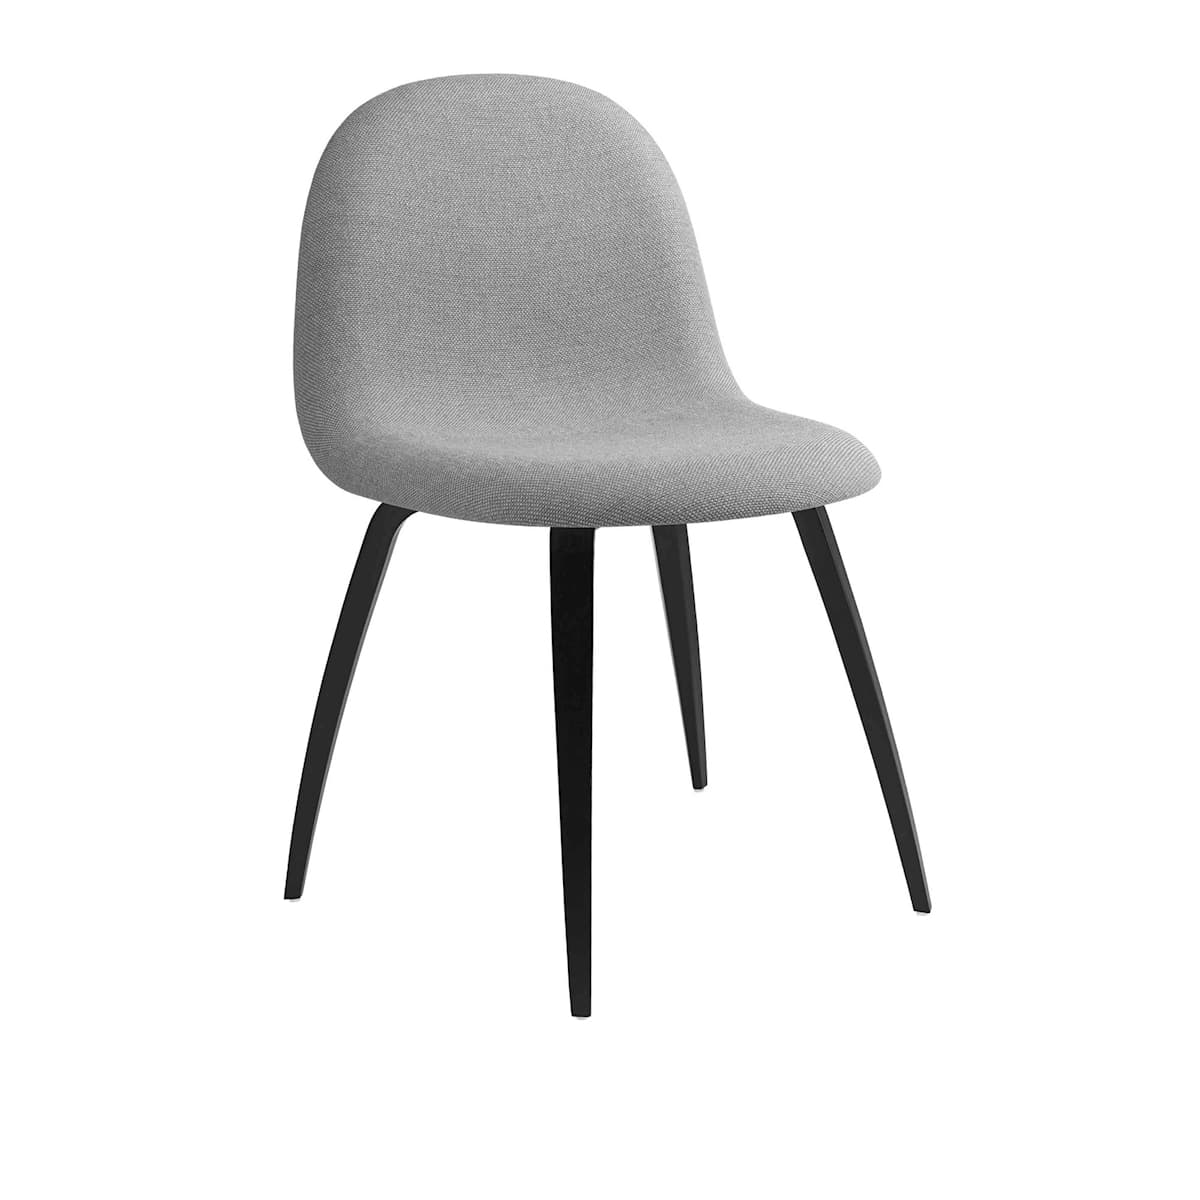 3D Dining Chair Wood Base - Upholstered